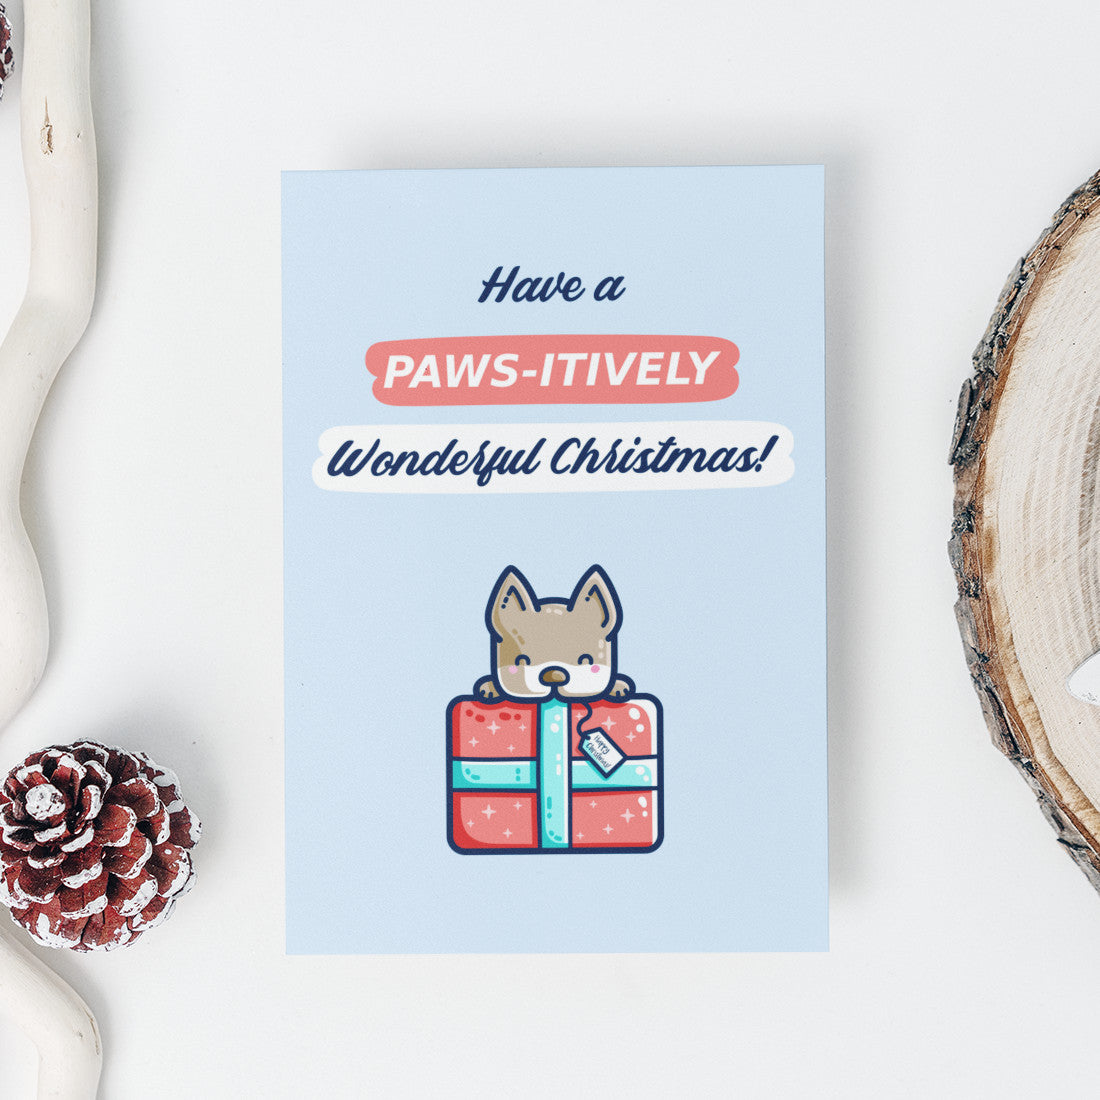 A pale blue card with the words 'have a paws-itively wonderful Christmas!' written above a picture of a dog peering over the top of a large wrapped red present. The card is lying flat on a white background with festive decorations around it.